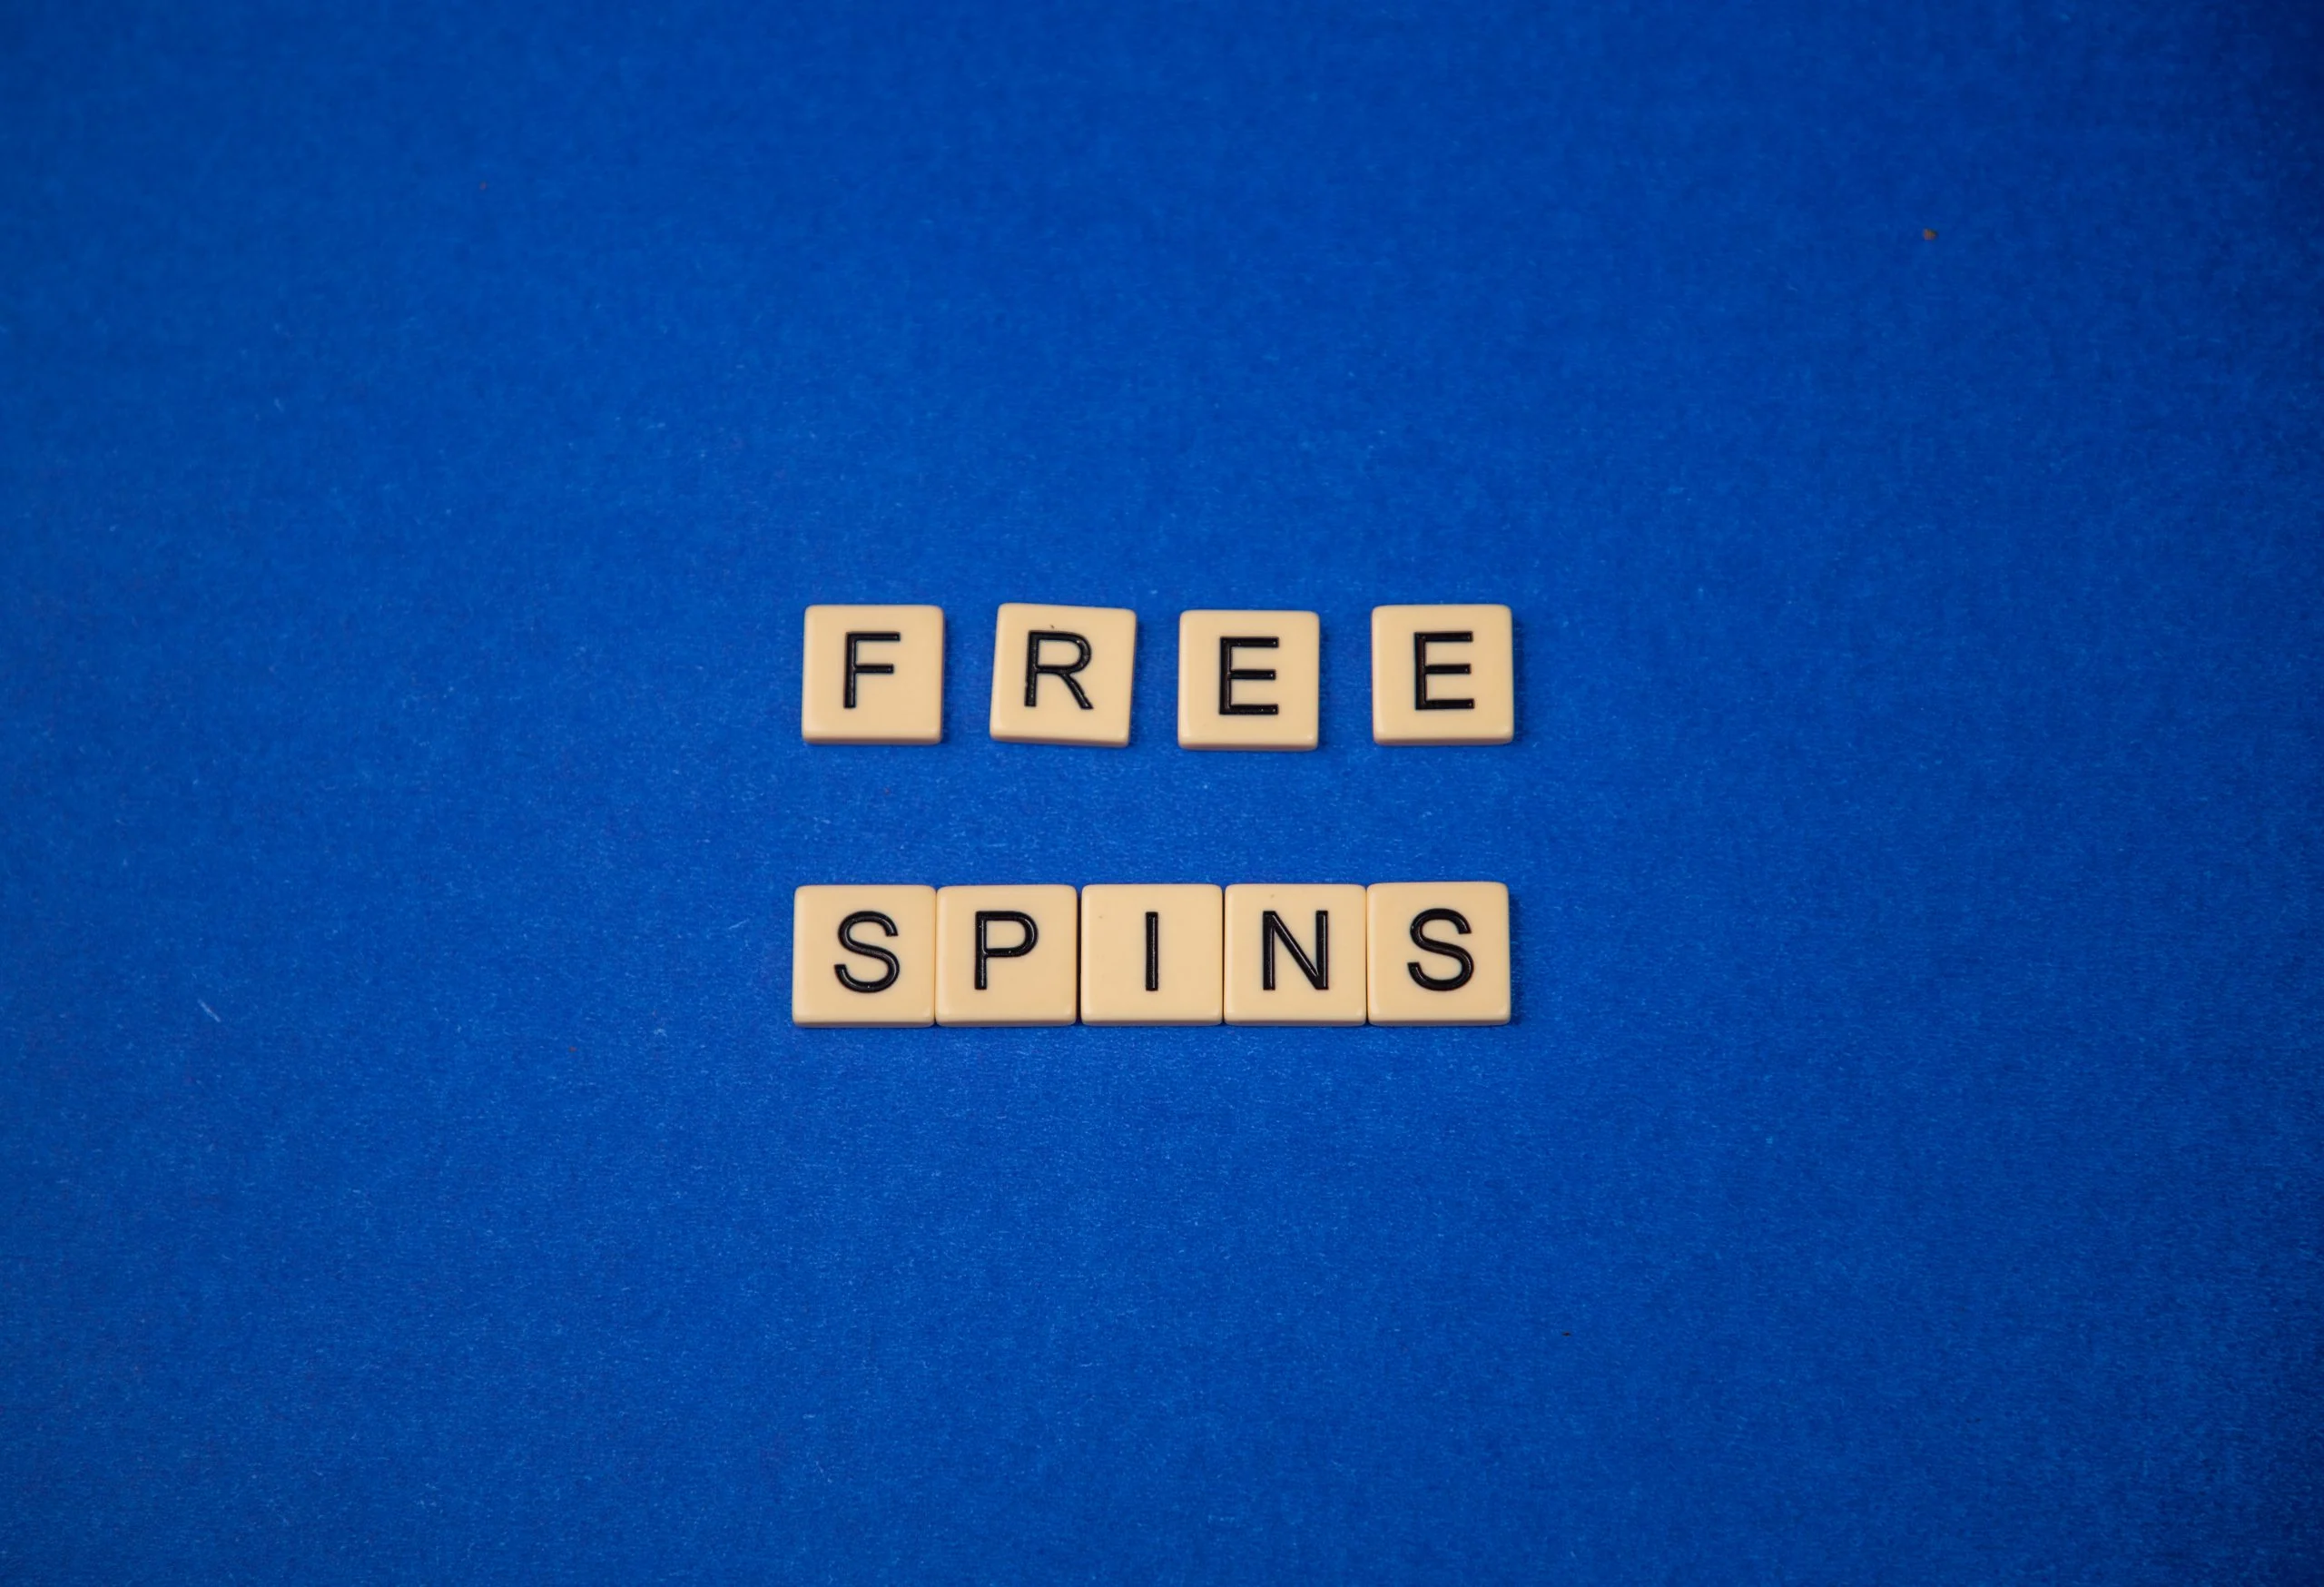 free spins scrabble